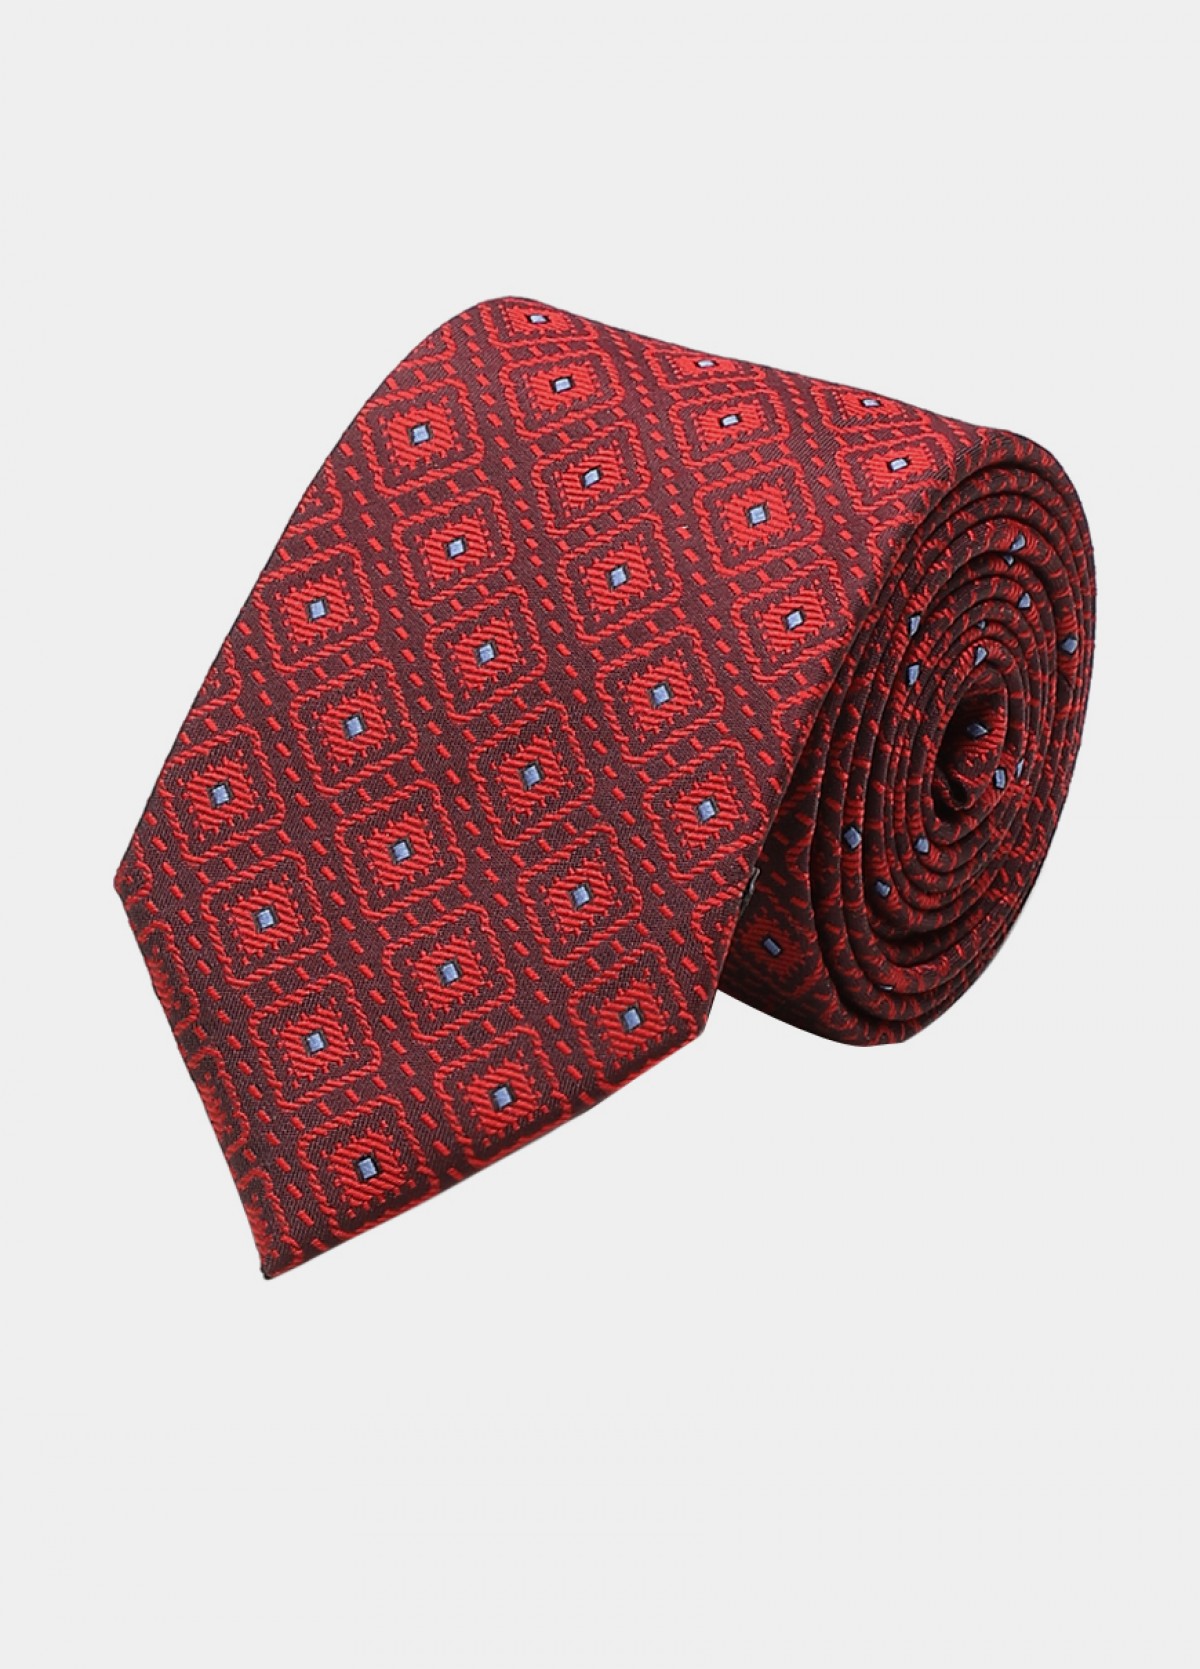 The Red Woven Tie